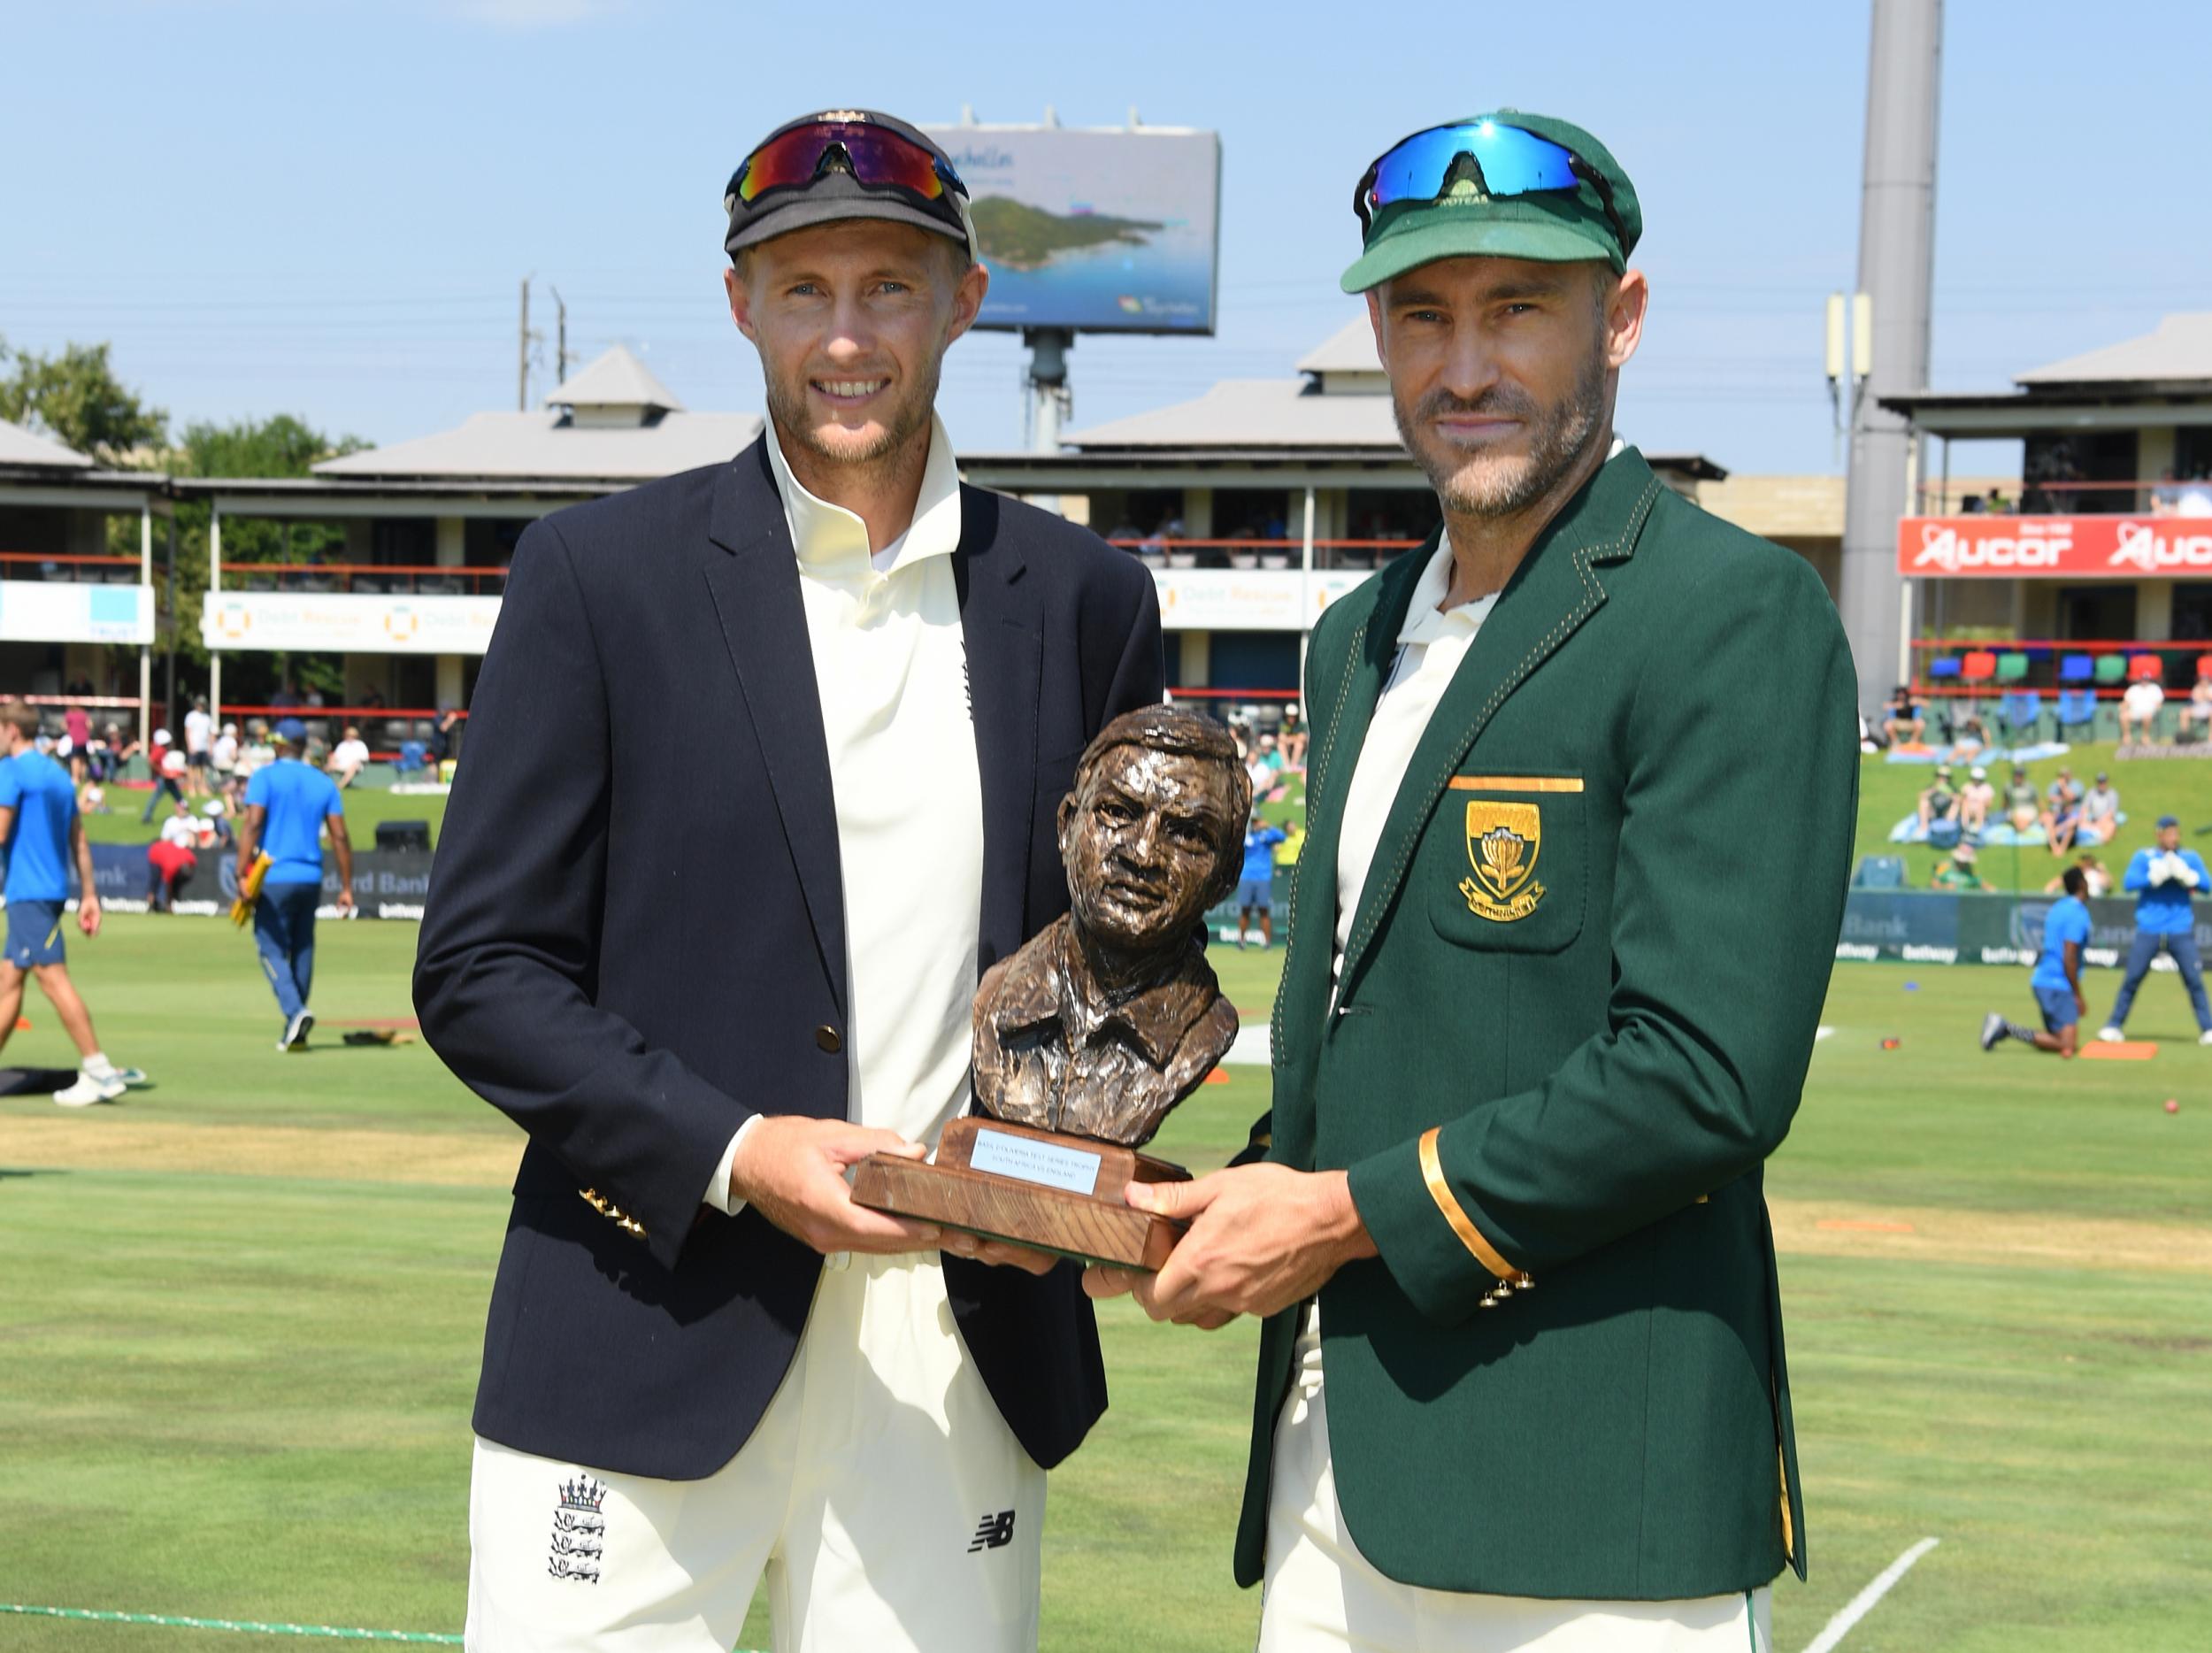 Joe Root won the toss on the first day of the Test